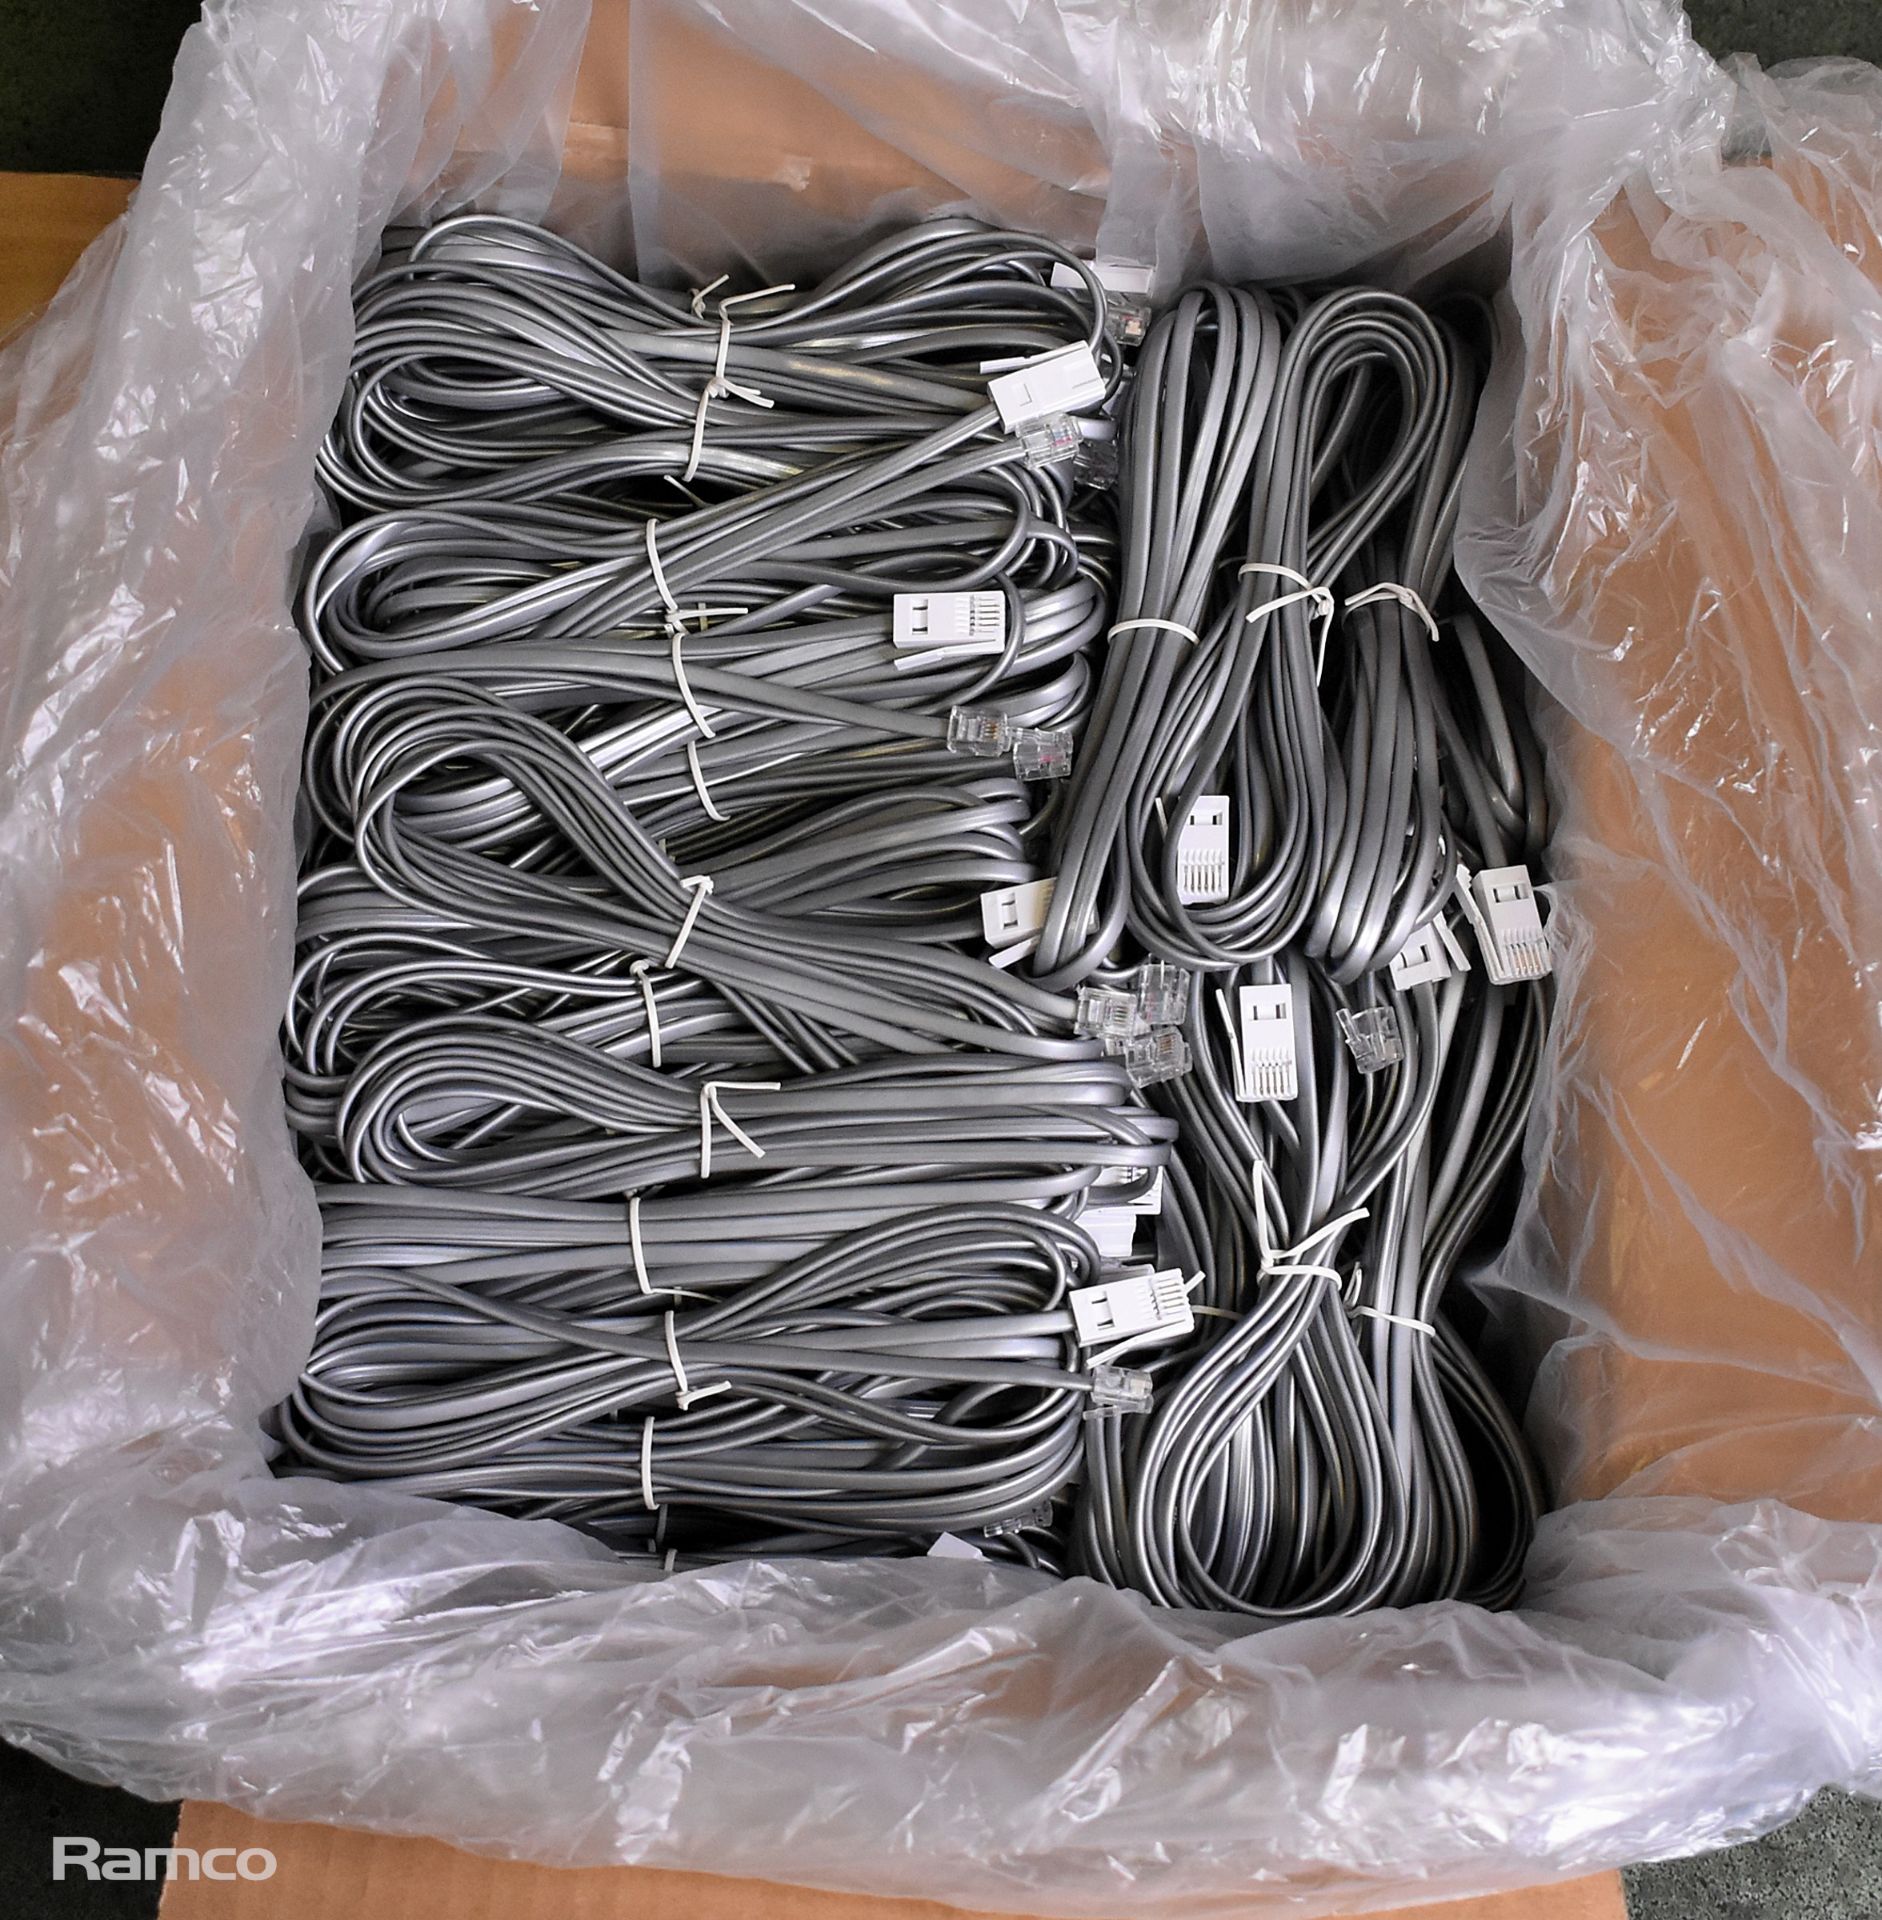 3x boxes of 4 pin RJ11 telephone cables - approx 150 cables per box - Image 3 of 4